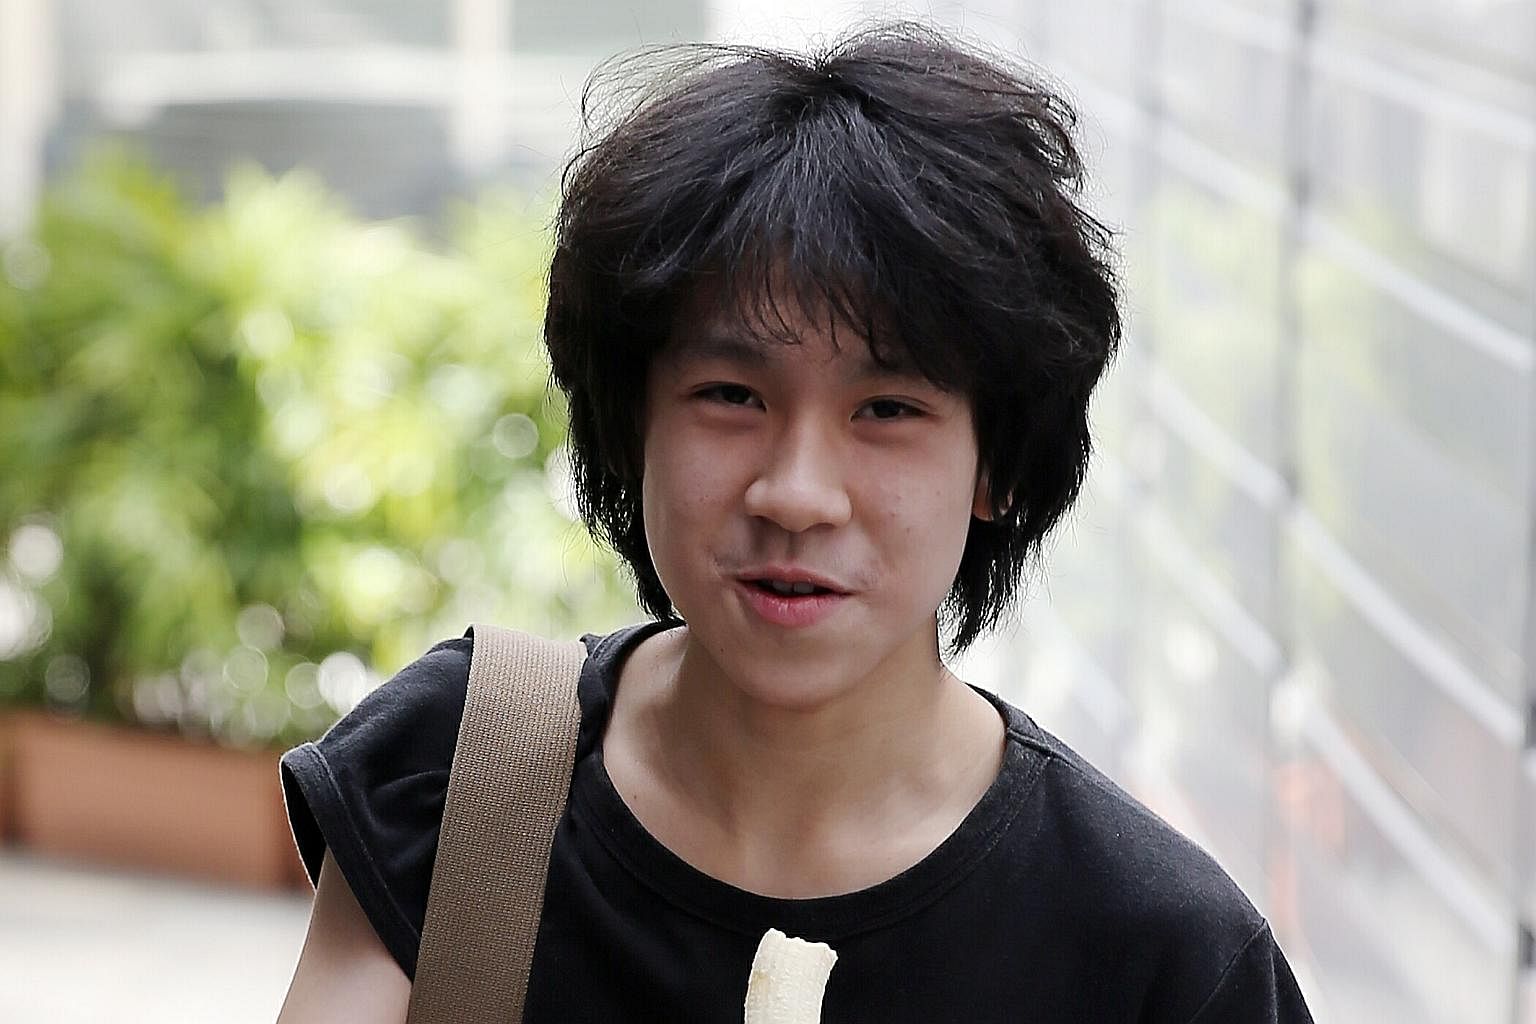 Amos yee is a singaporean youtube personality